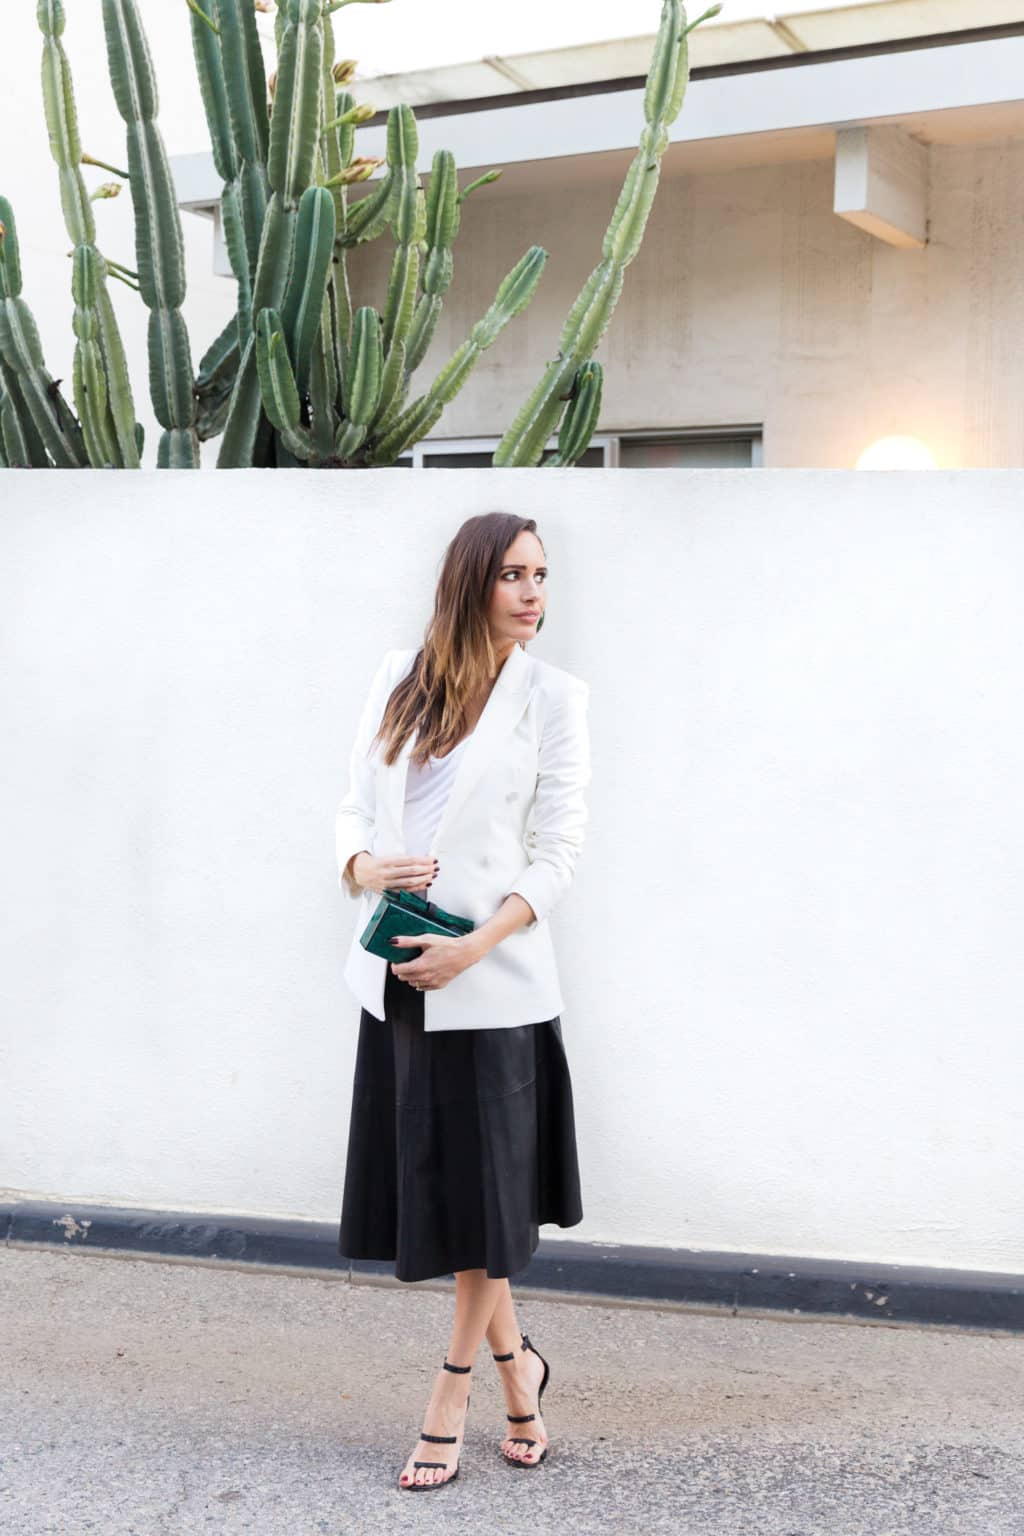 Winter Whites: Faux Pas or Fashion Forward? - Front Roe by Louise Roe